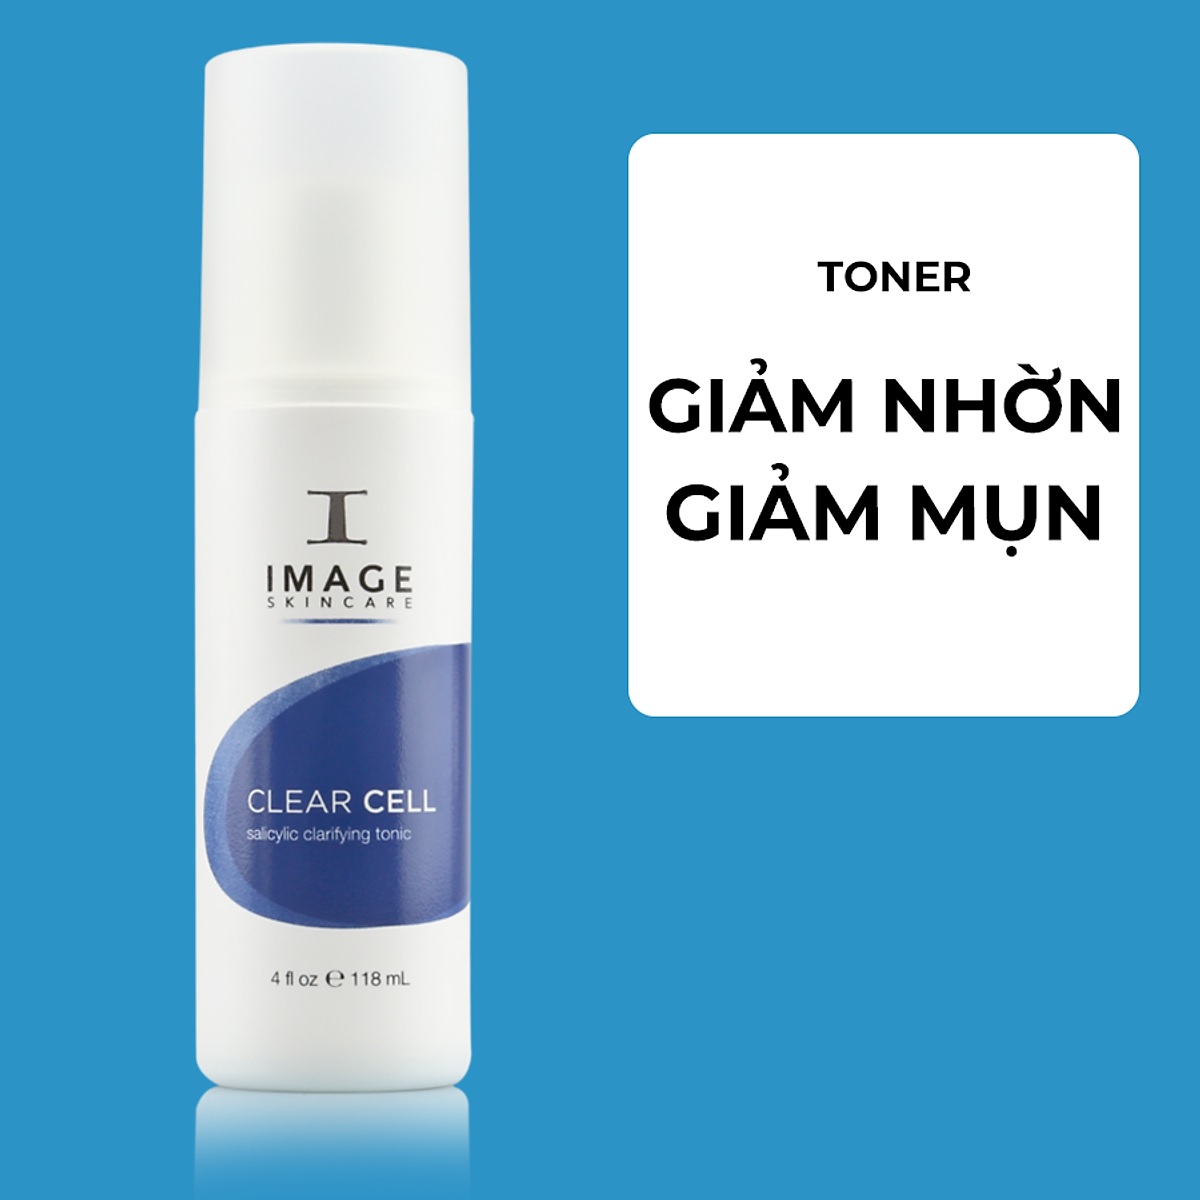 /nuo-c-can-ba-ng-image-clear-cell-salicylic-clarifying-tonic